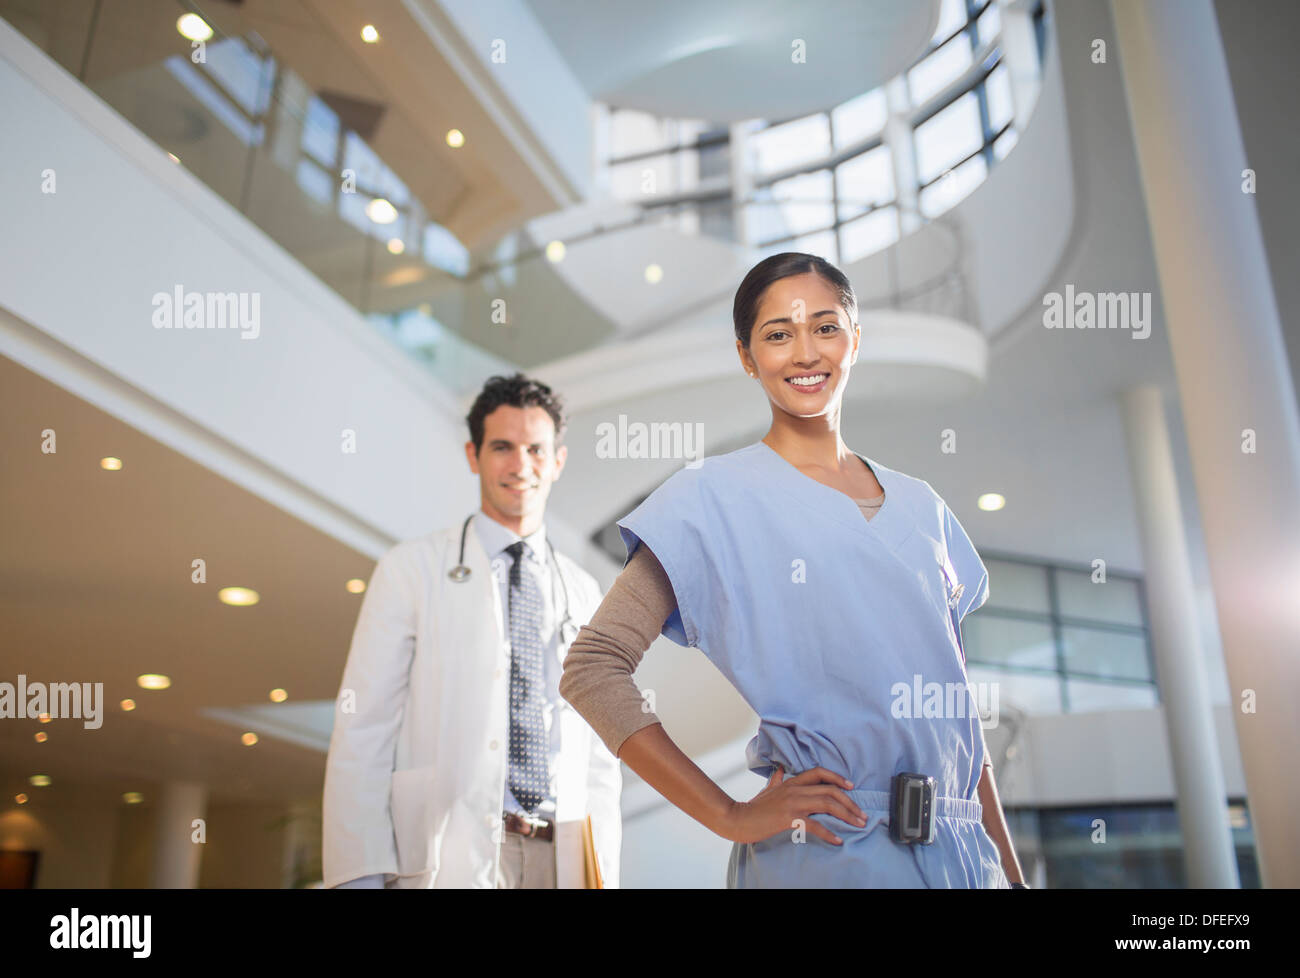 Portrait of smiling doctor and nurse in hospital atrium Stock Photo